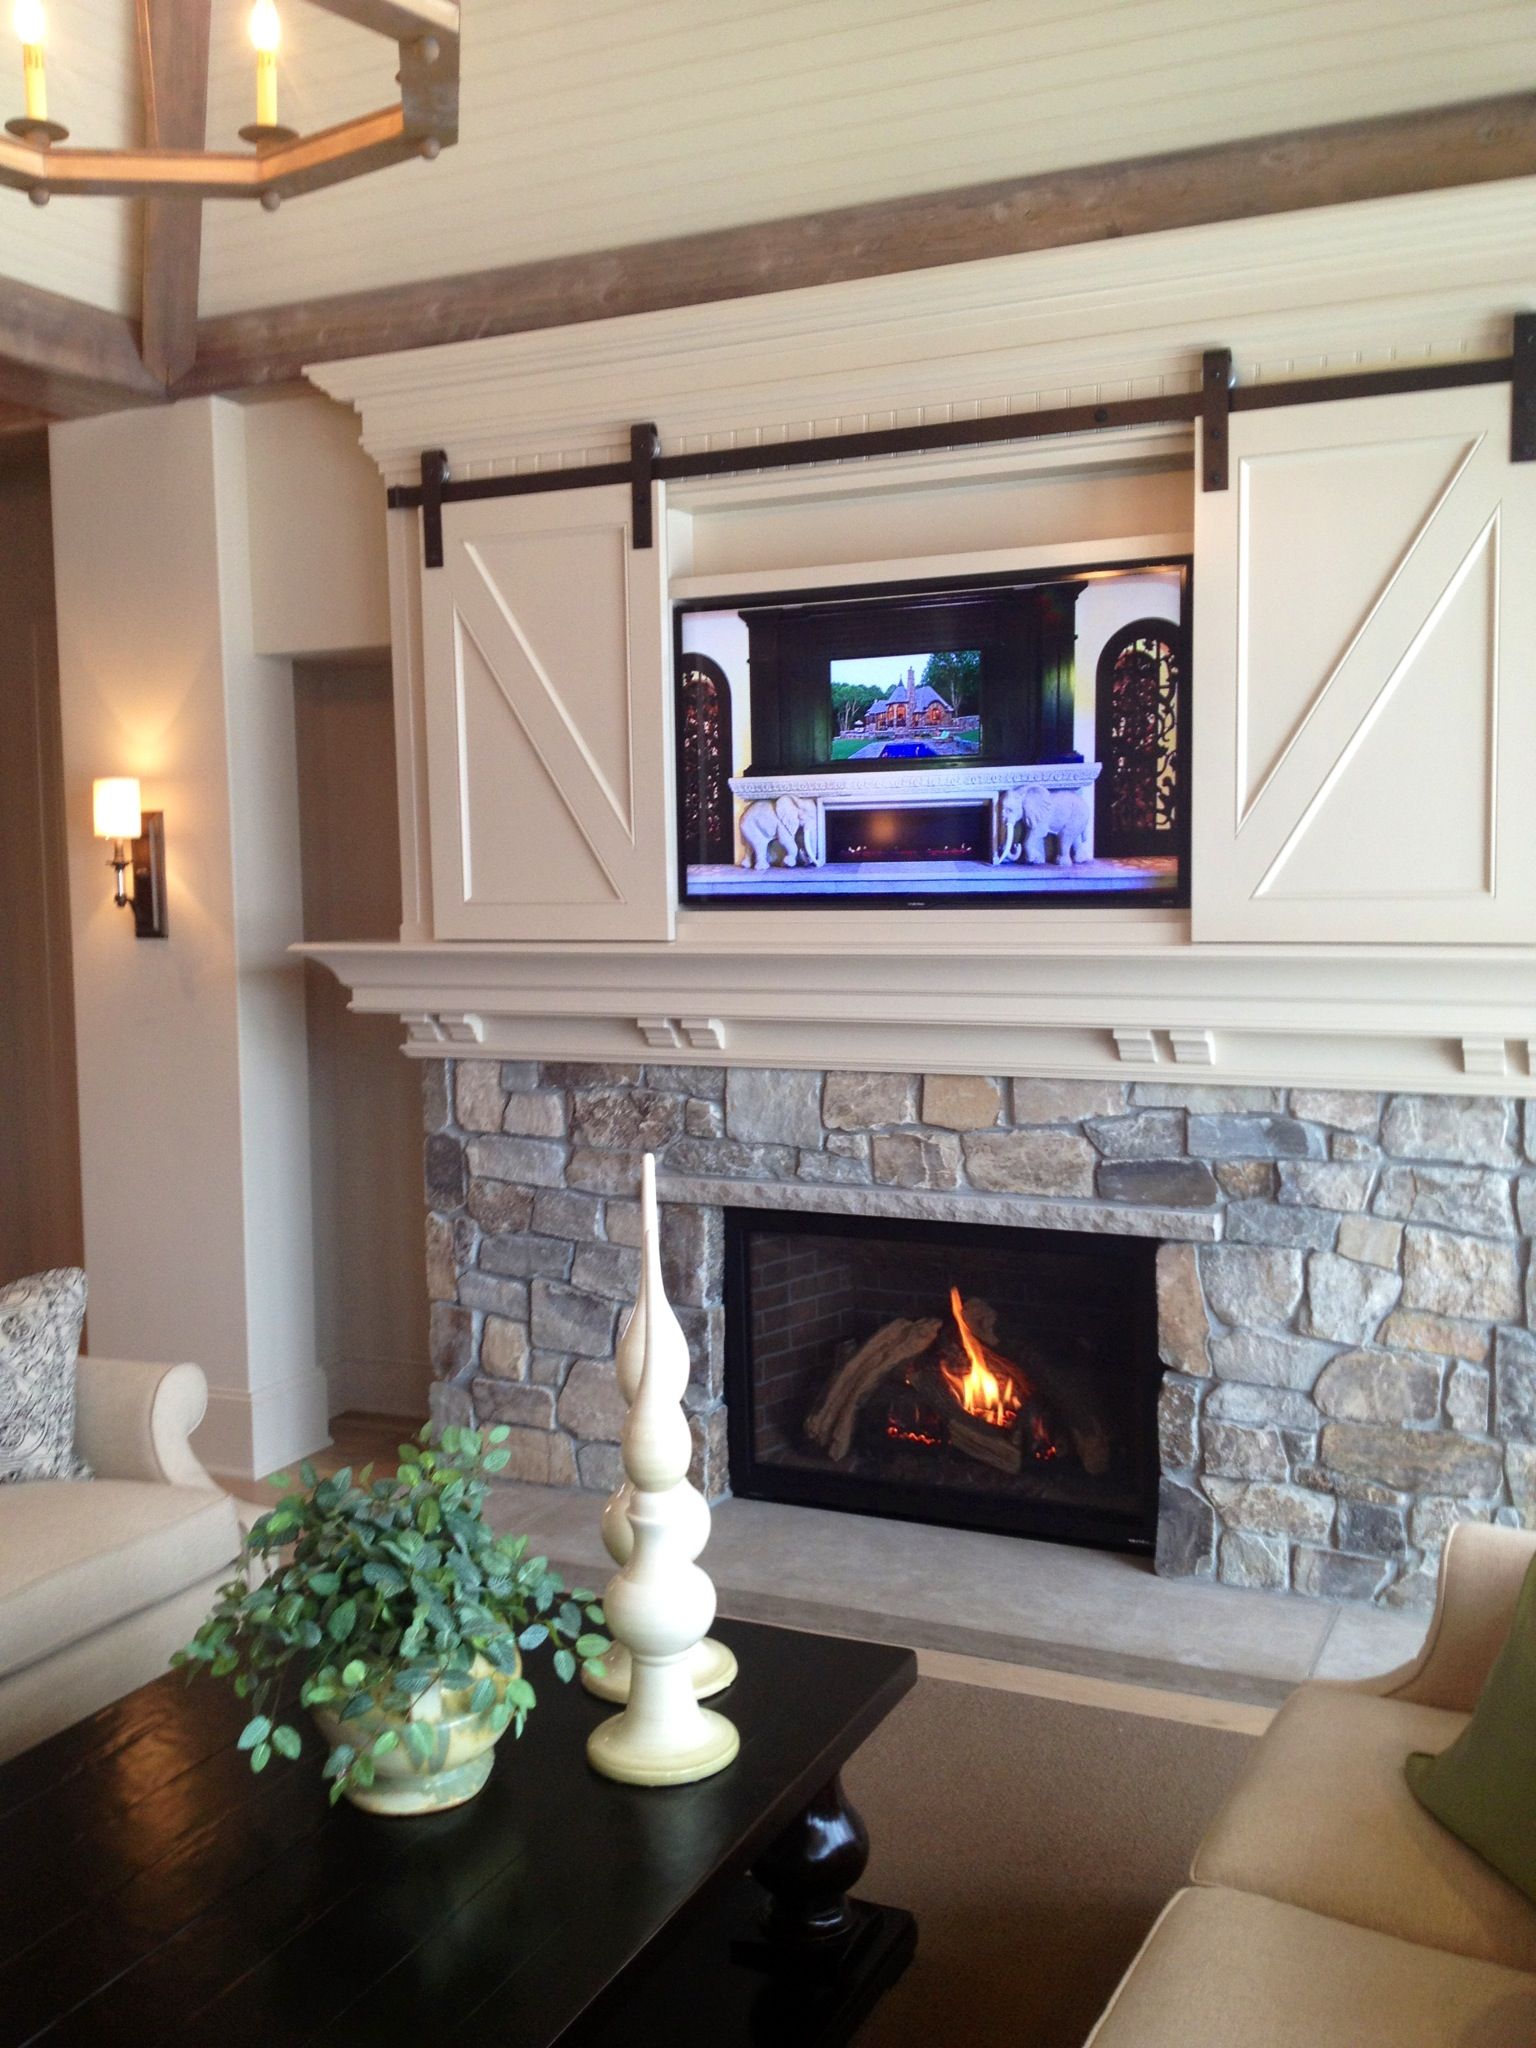 Can You Hang A Tv Over A Fireplace Fresh 50 Ways to Use Interior Sliding Barn Doors In Your Home